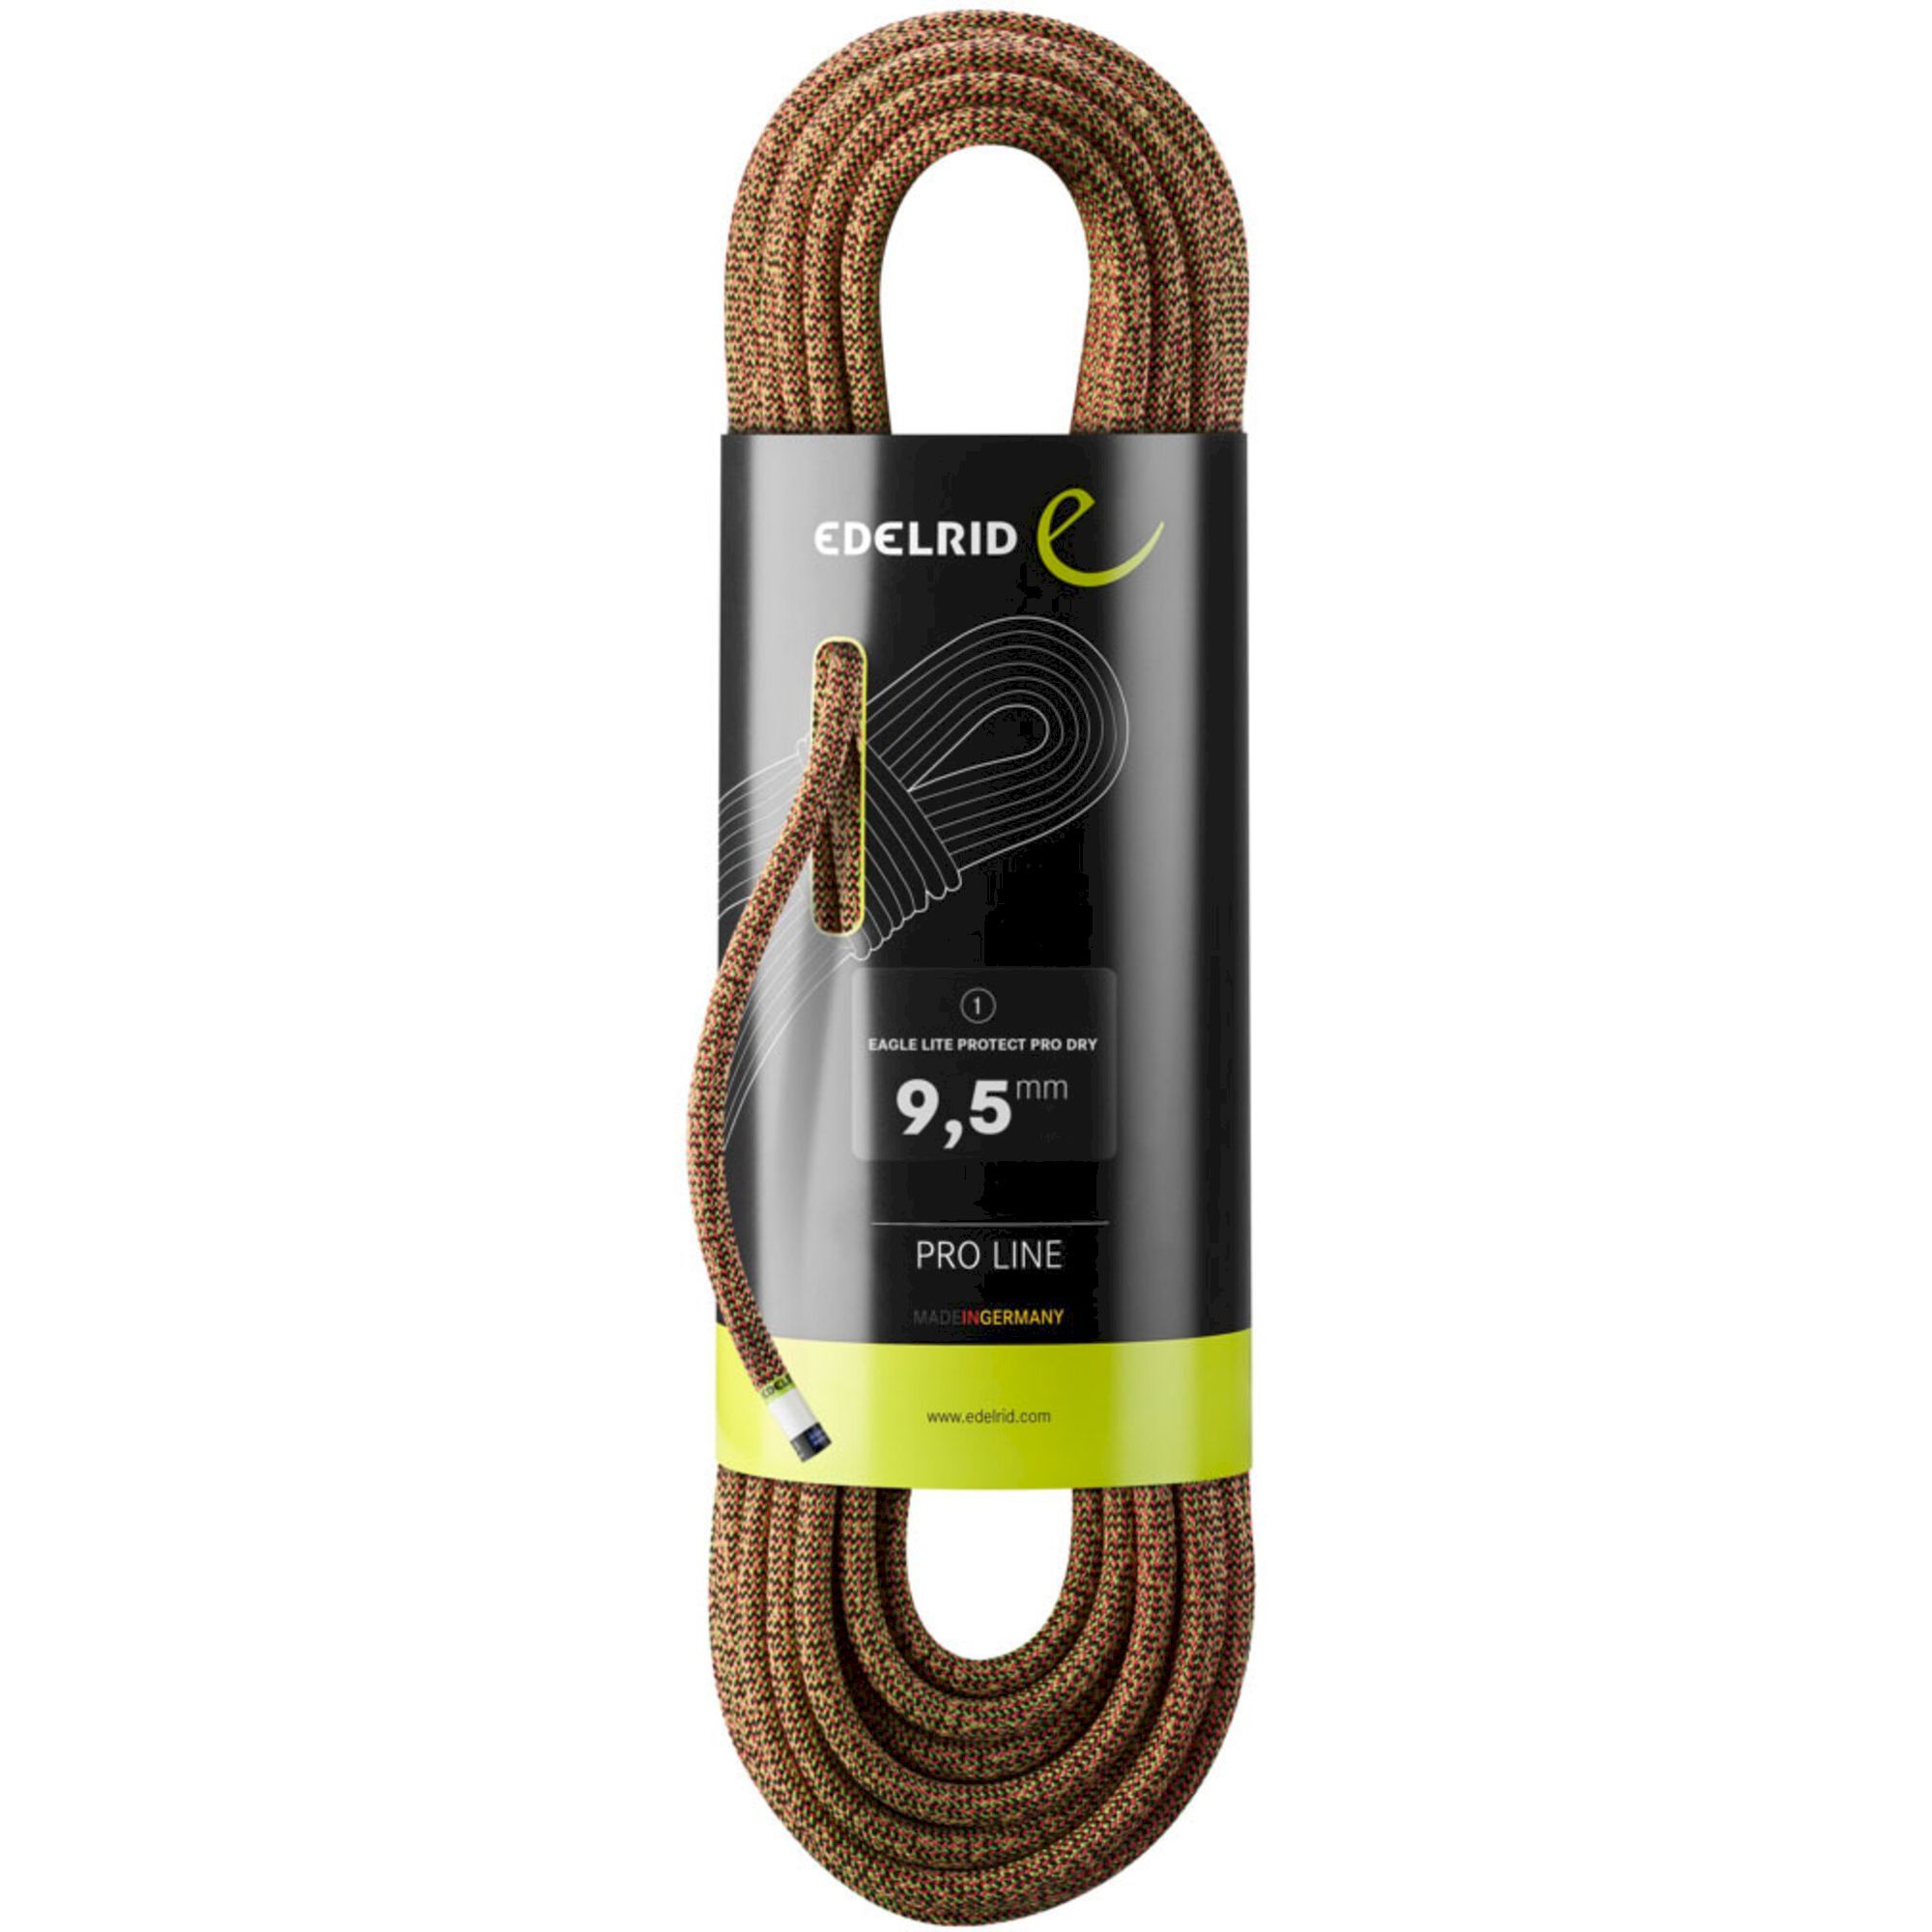 Edelrid Eagle Lite Protect Pro Dry 9,5 mm - Lina wspinaczkowa | Hardloop